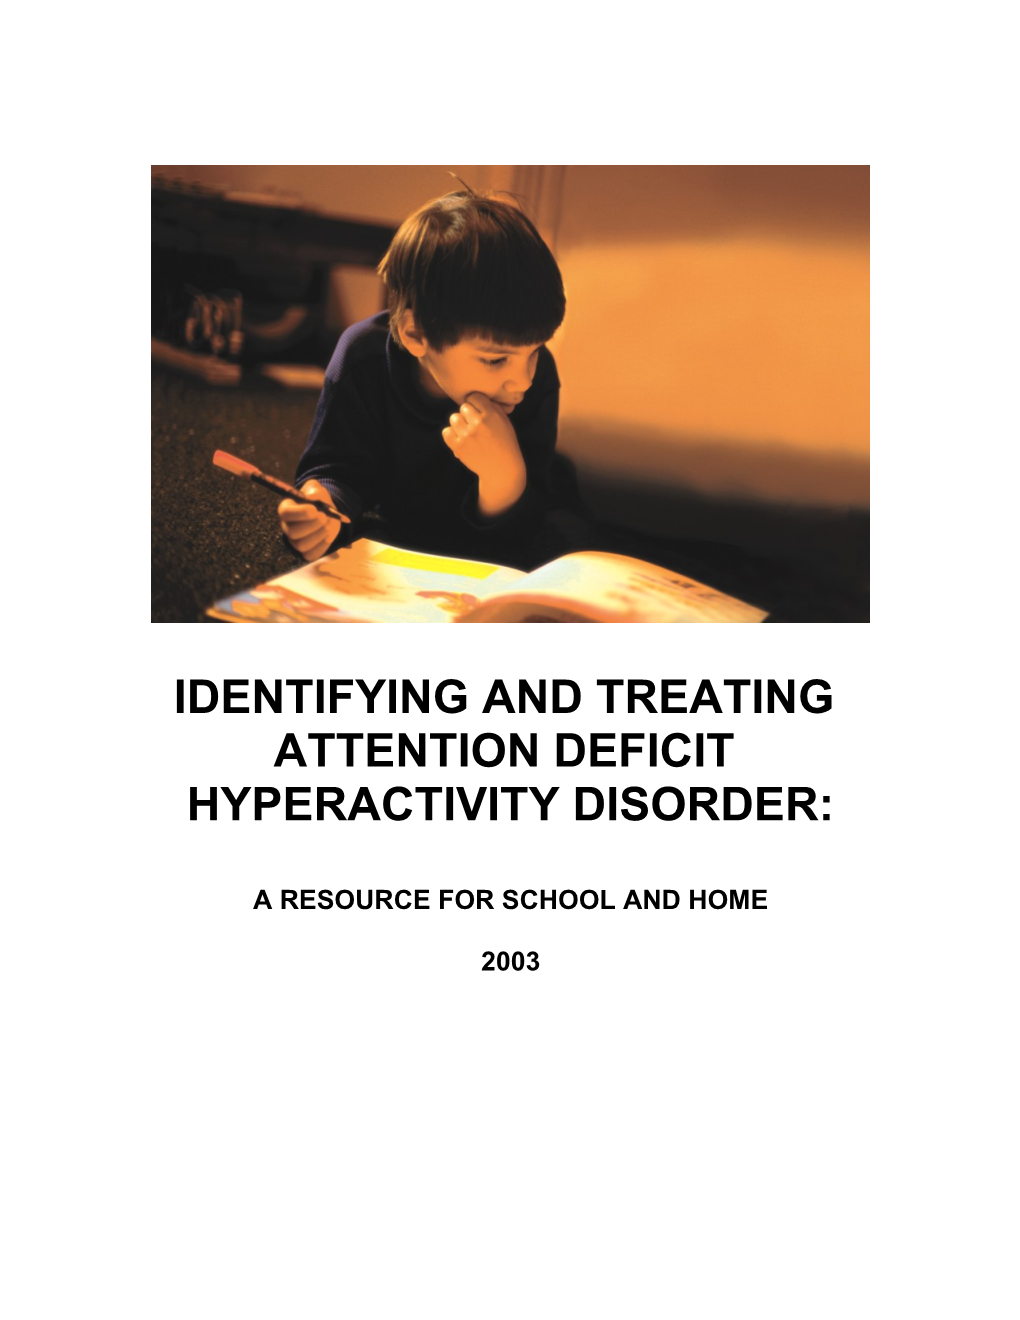 Identifying and Treating Attention Deficit Hyperactivity Disorder: a Resource for School